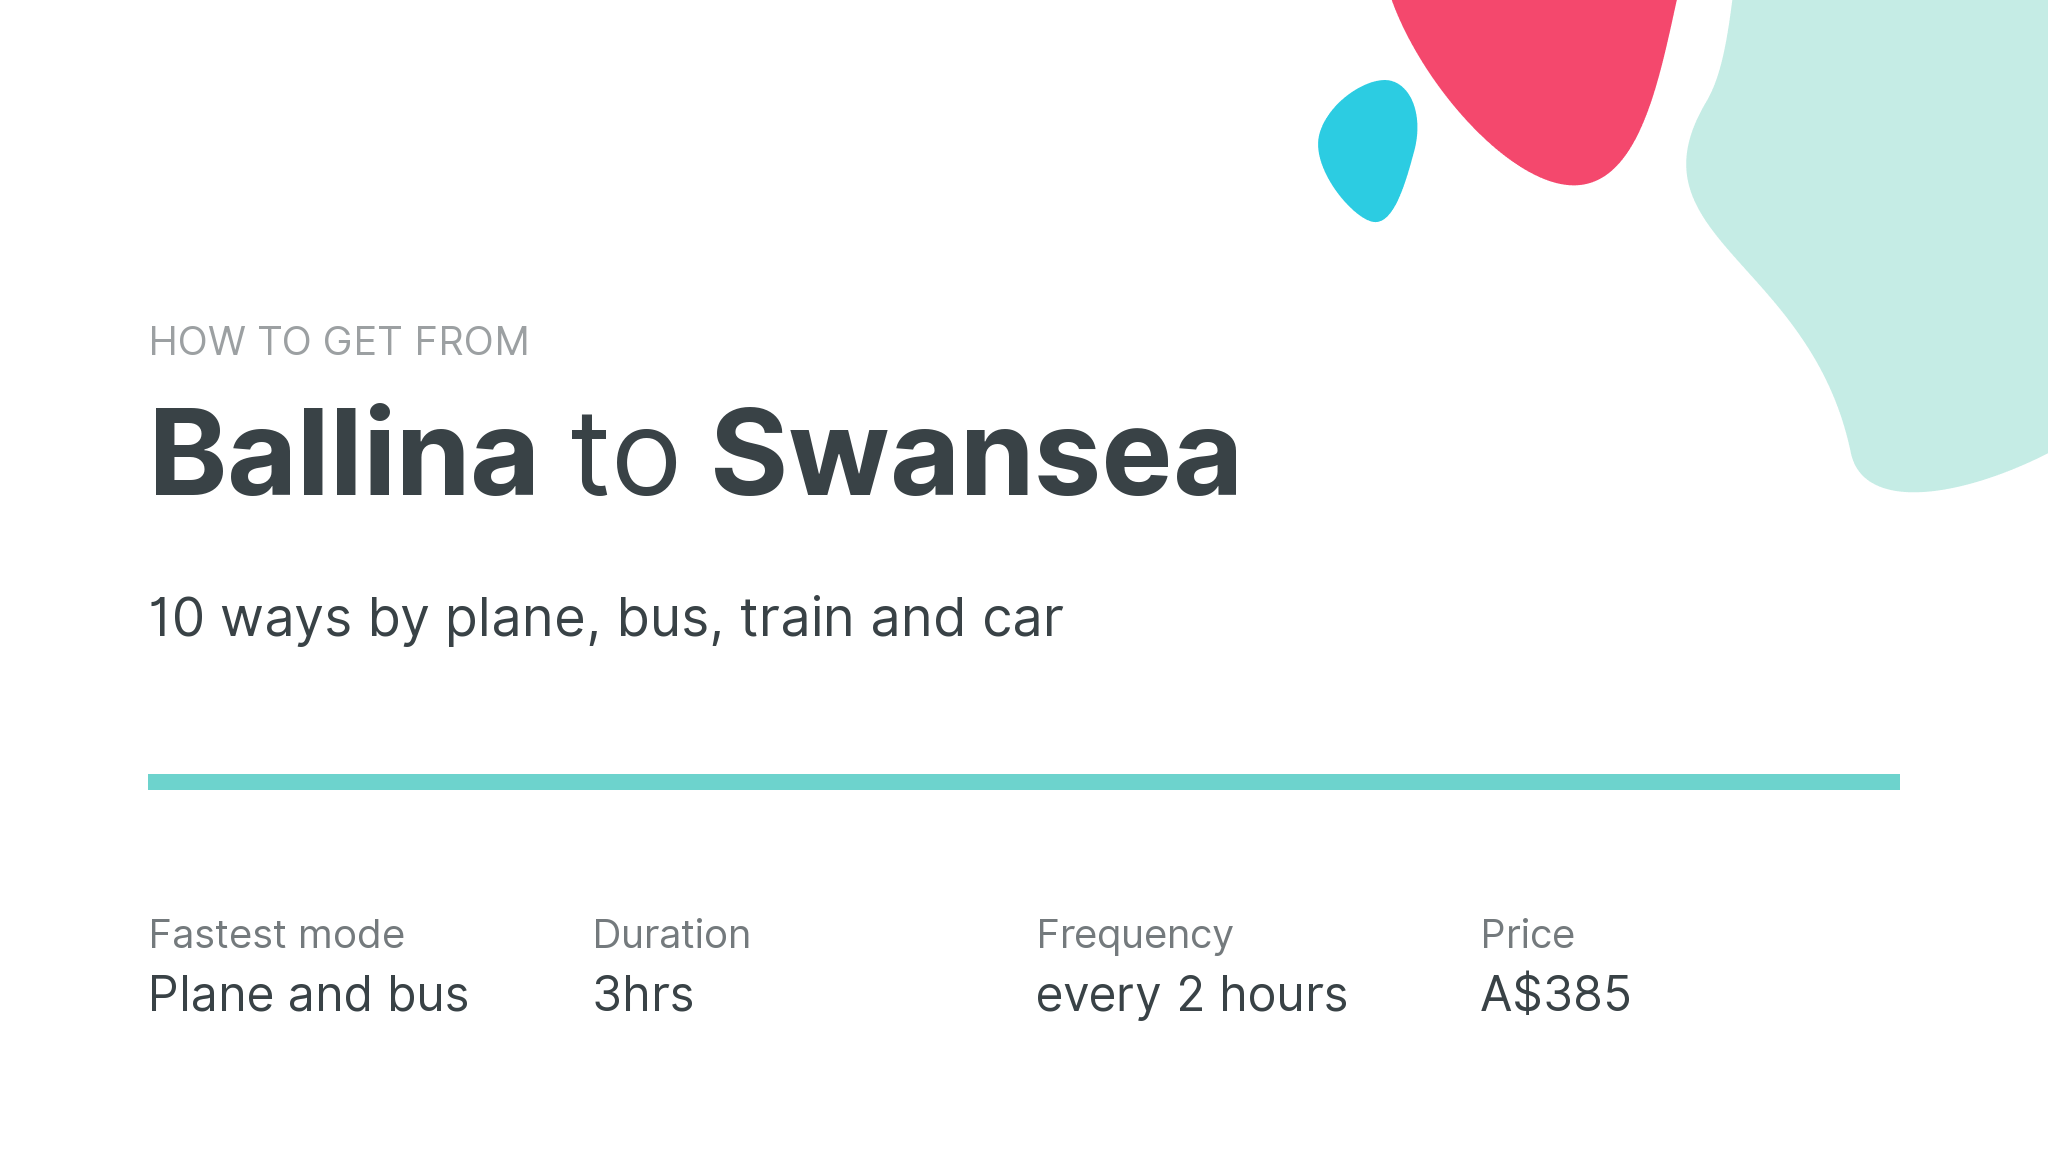 How do I get from Ballina to Swansea